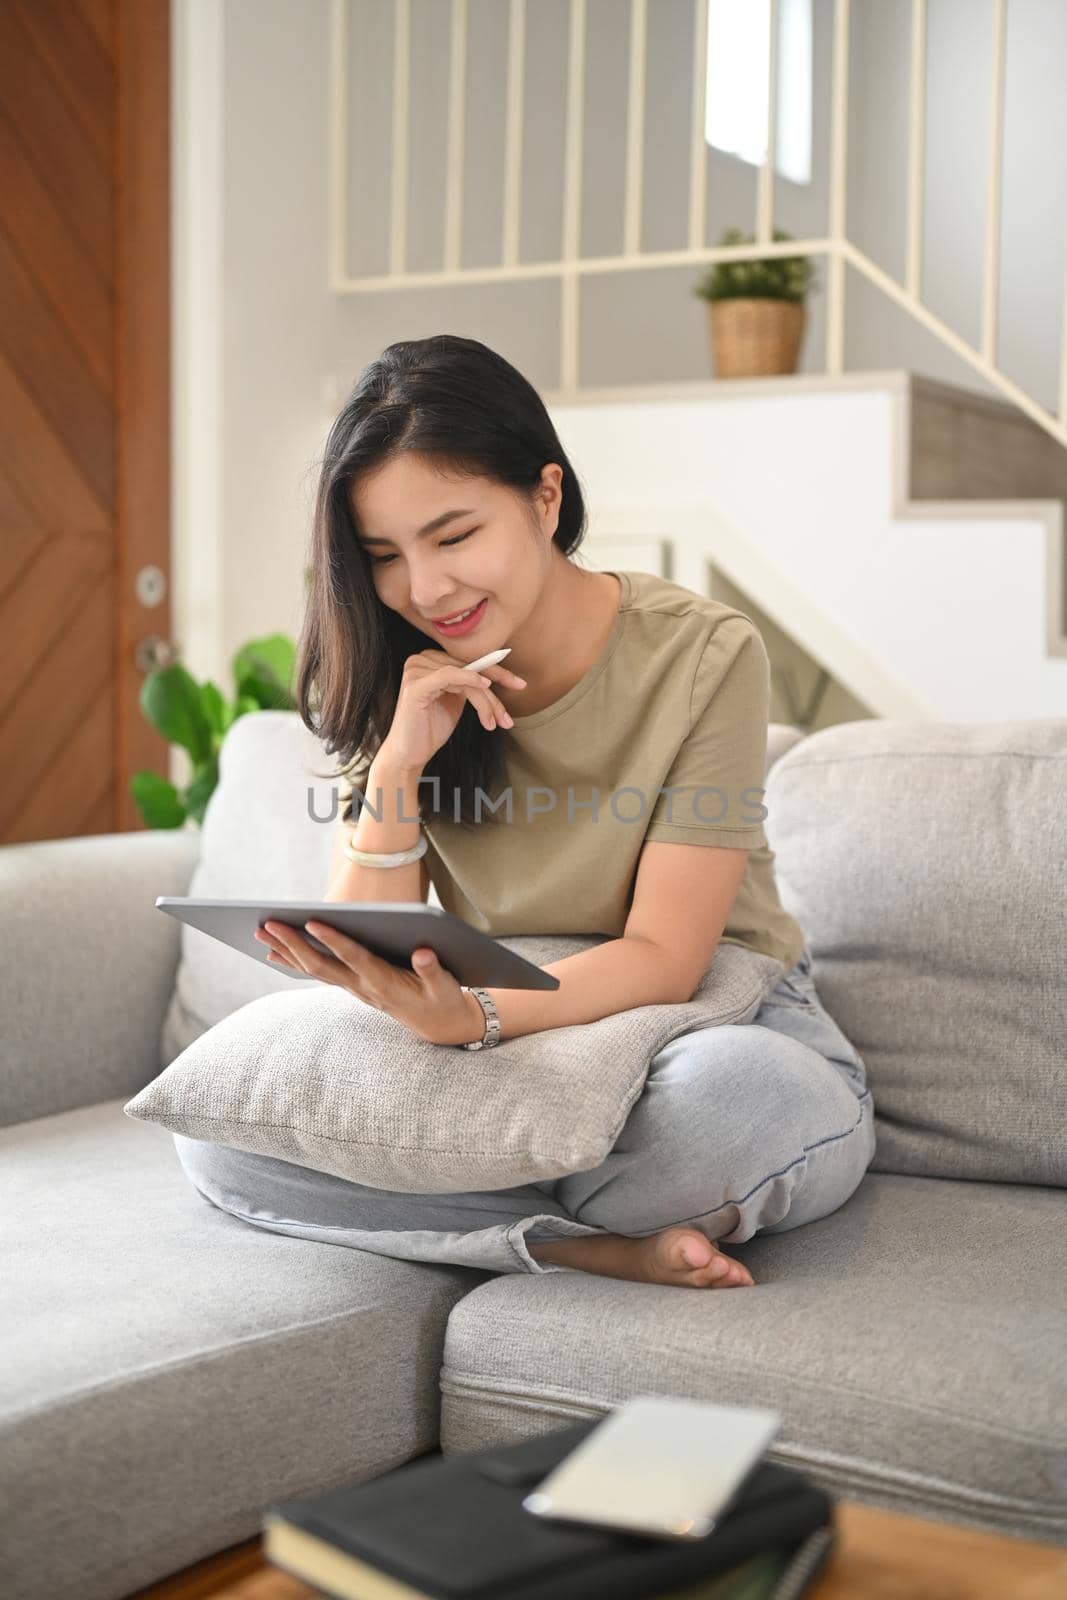 Smiling young woman resting on couch and browsing wireless internet on digital tablet. People, technology concept by prathanchorruangsak